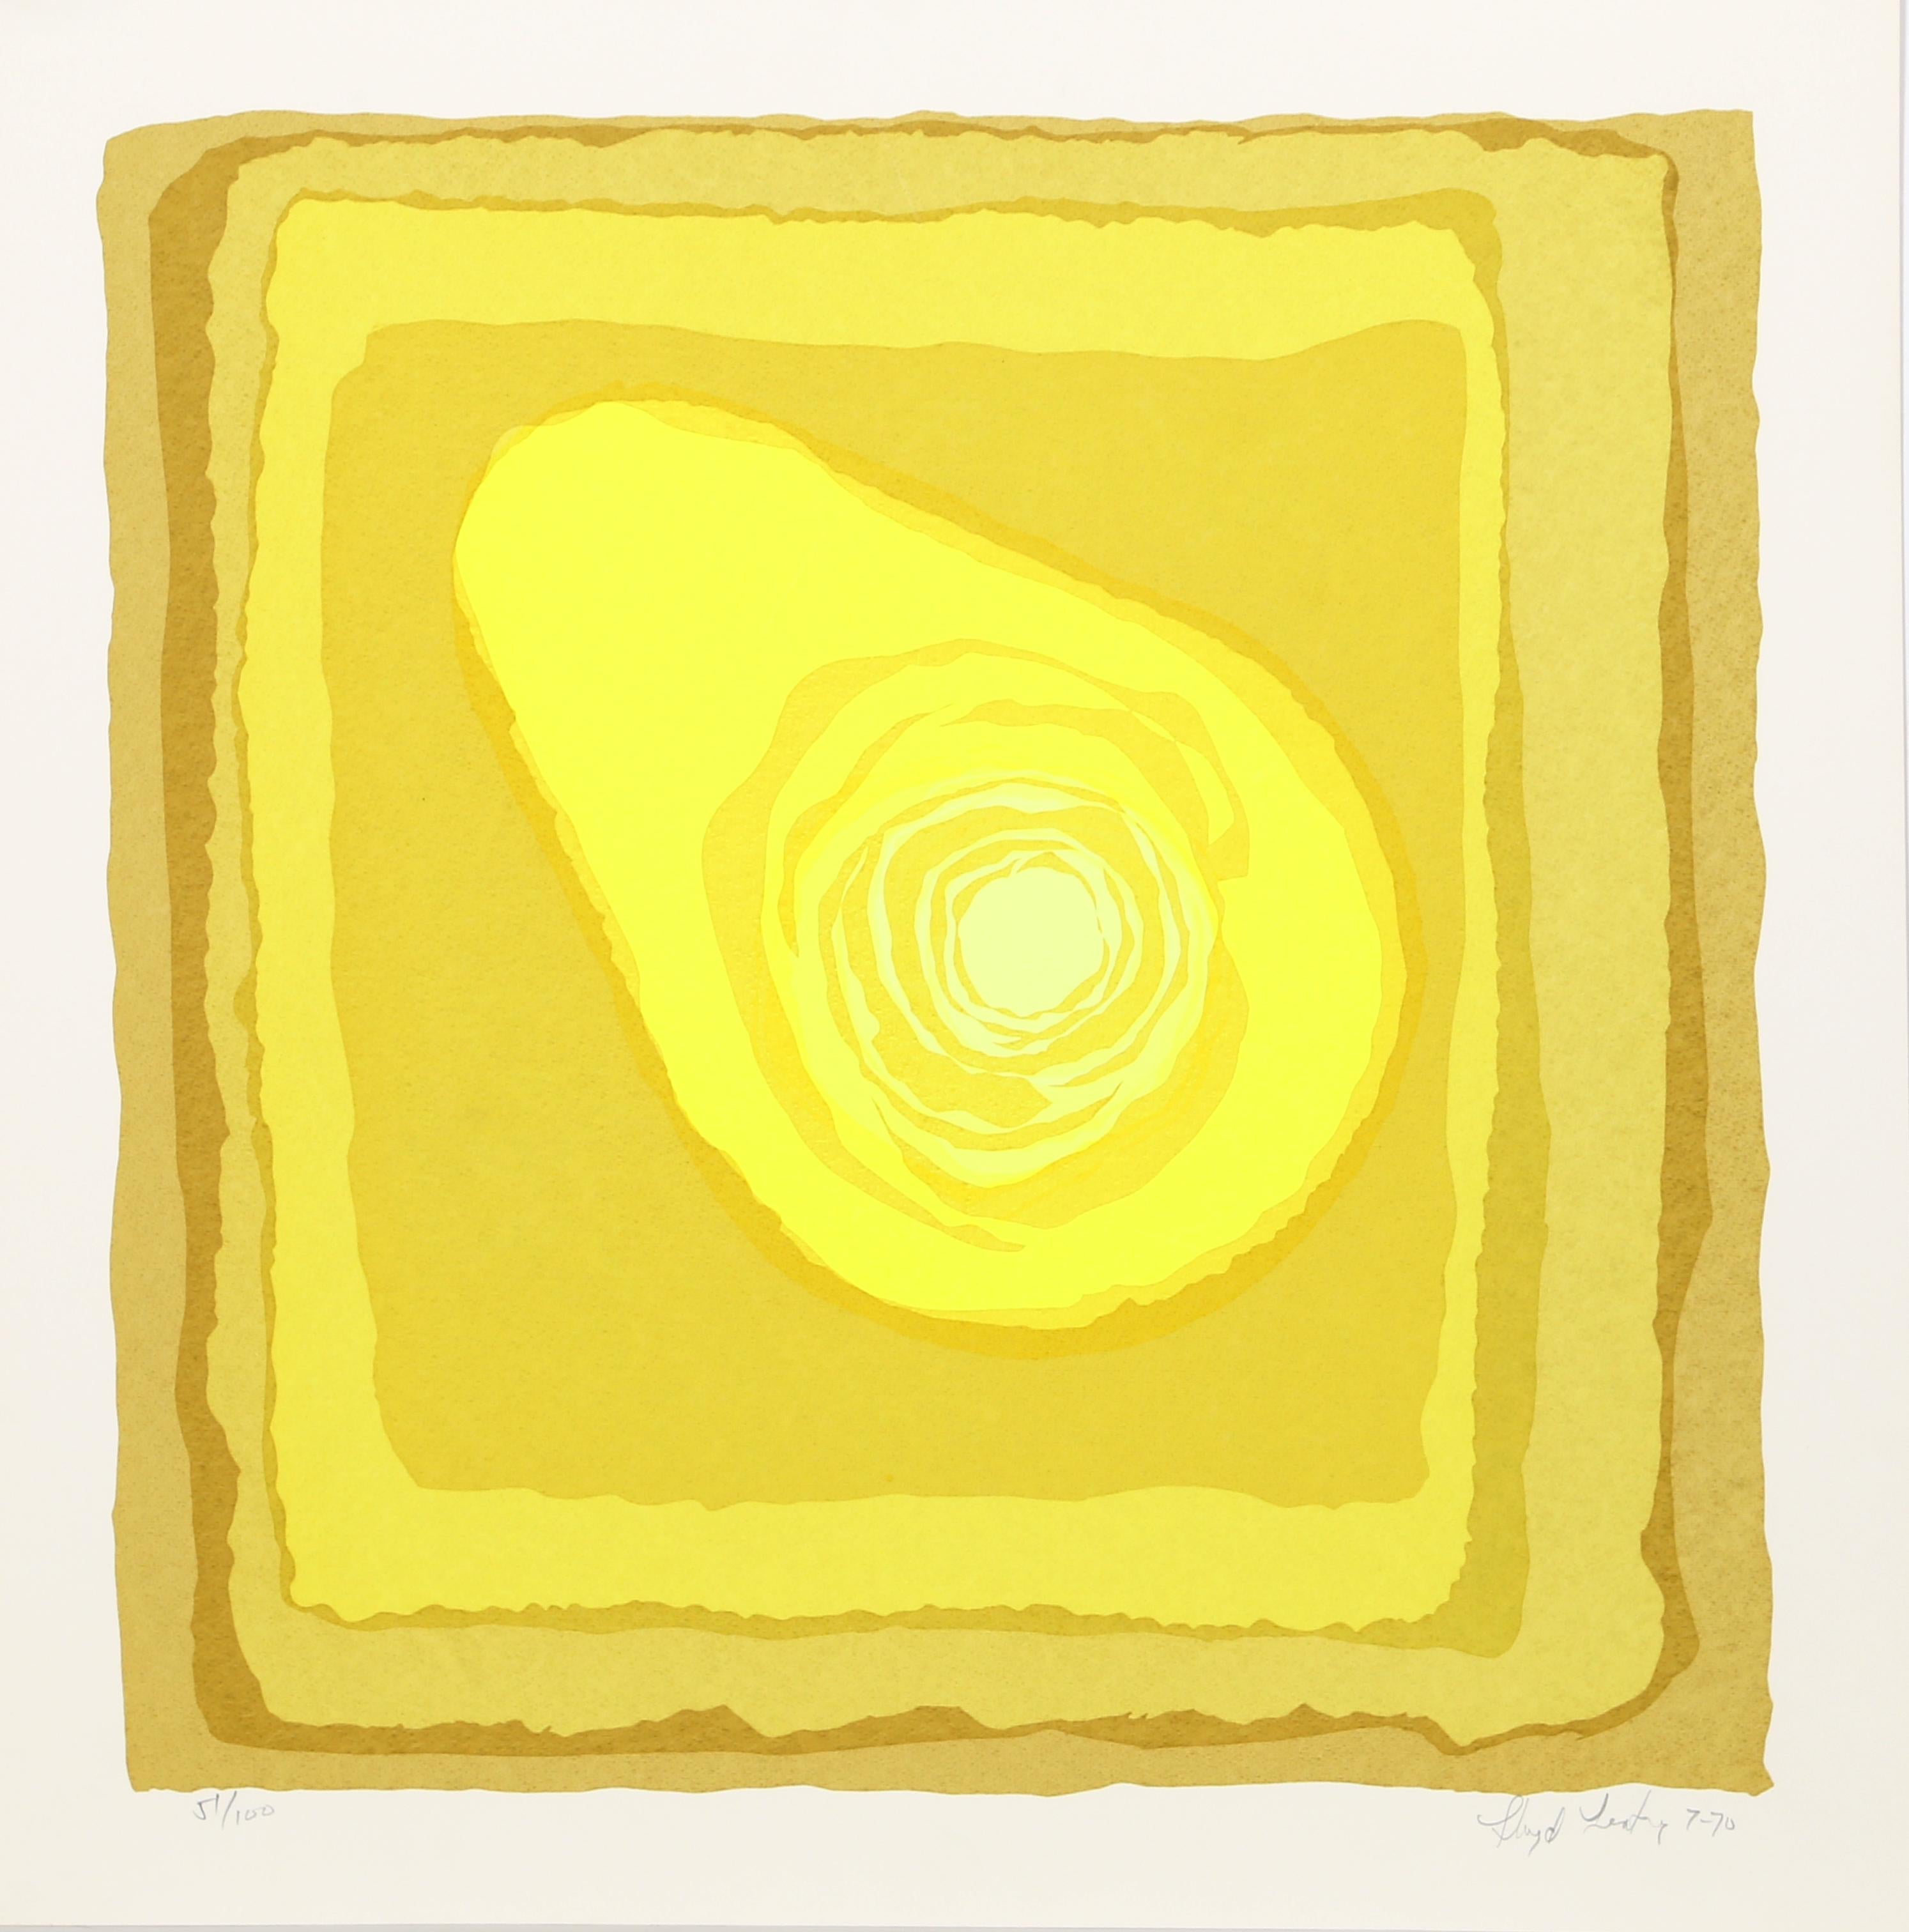 Artist: Lloyd Fertig, American (1943 - 1995)
Title: Untitled - Green Abstract 
Year: 1970
Medium: Serigraph, signed and numbered in pencil
Edition: 100
Size: 28 x 22 in. (71.12 x 55.88 cm)